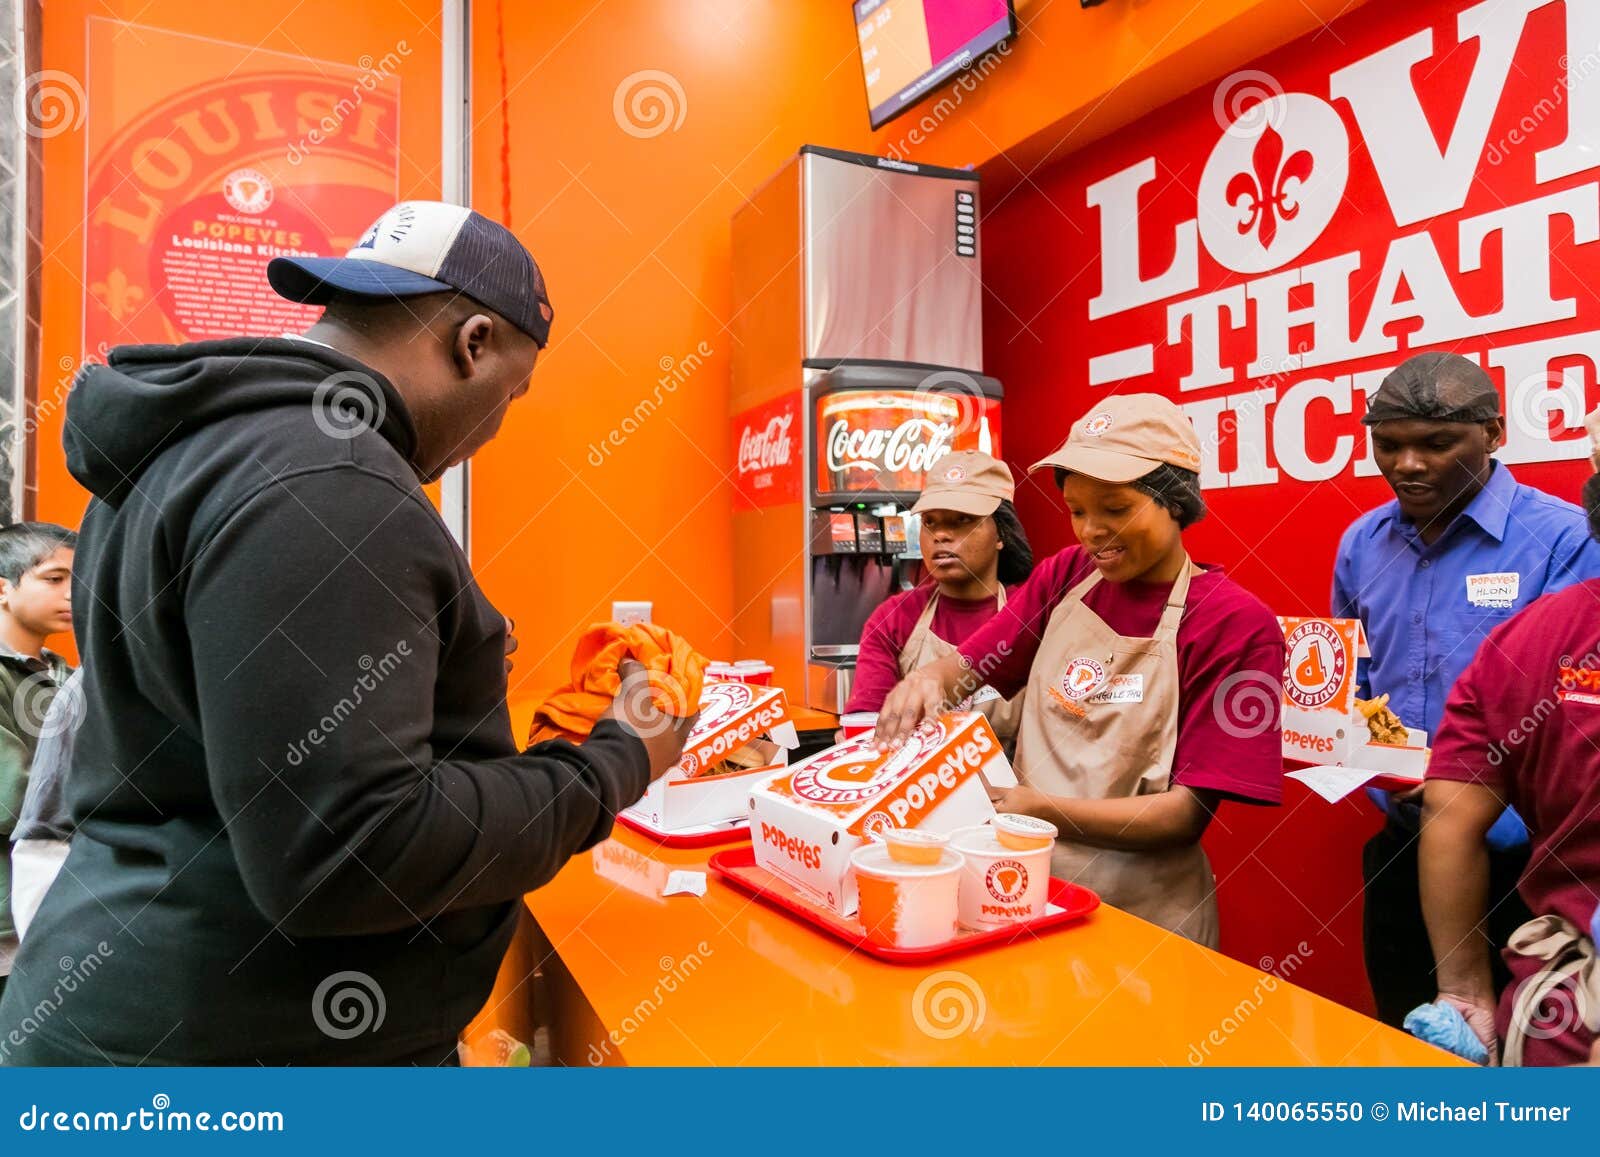 Customers At A Popeyes Take Out Fast Food Restaurant ...